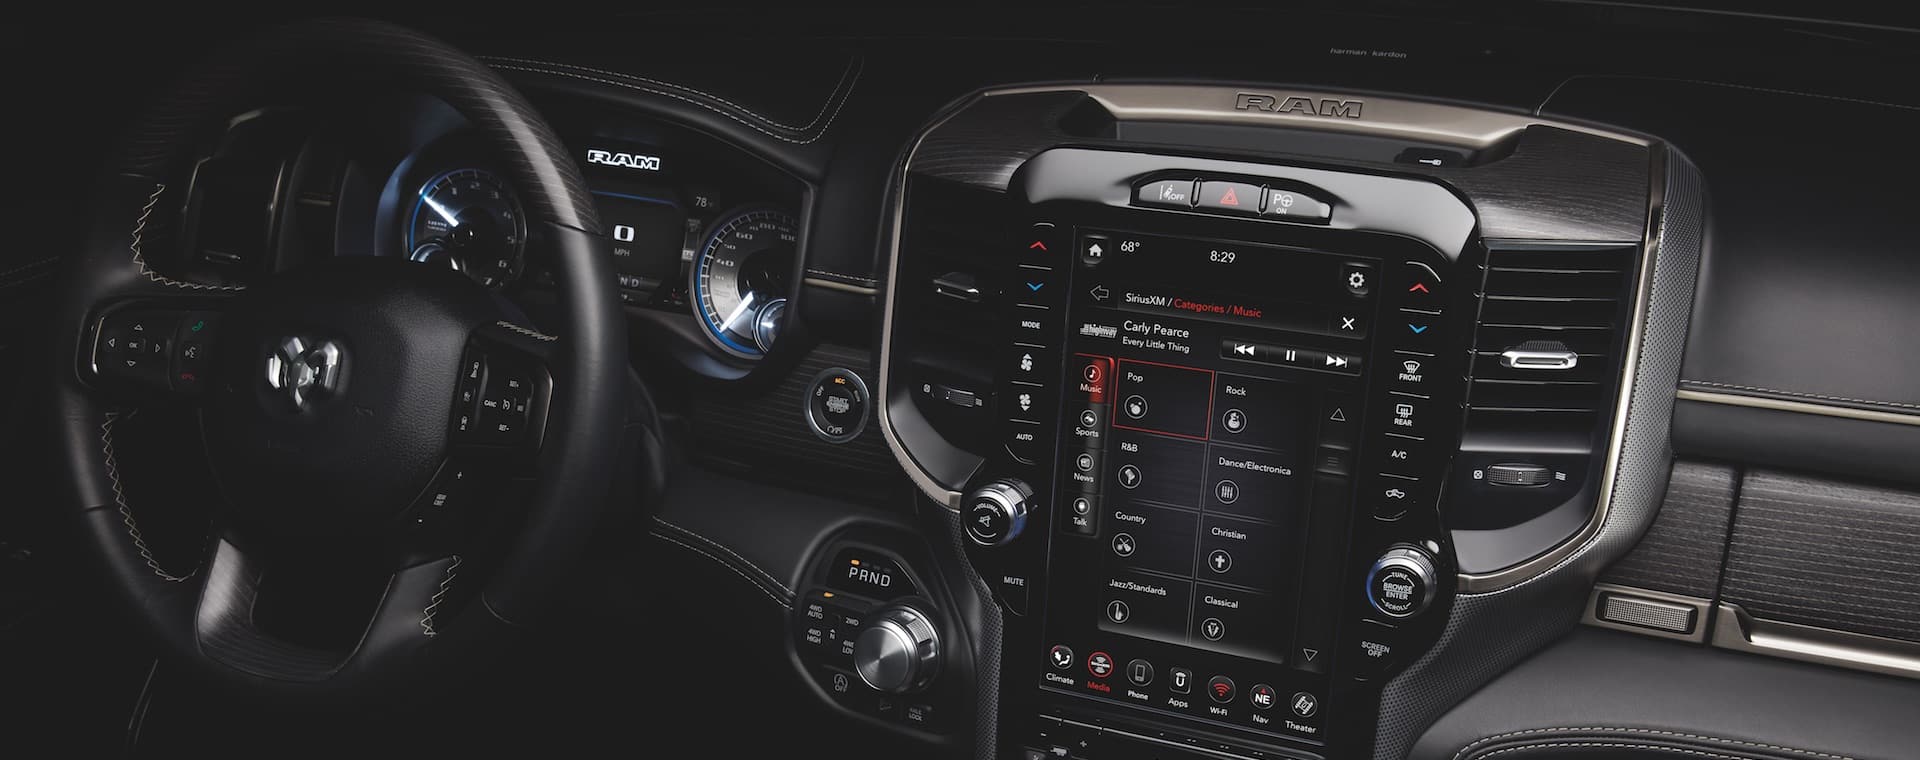 Ram Trucks Uconnect System - Select a Uconnect System